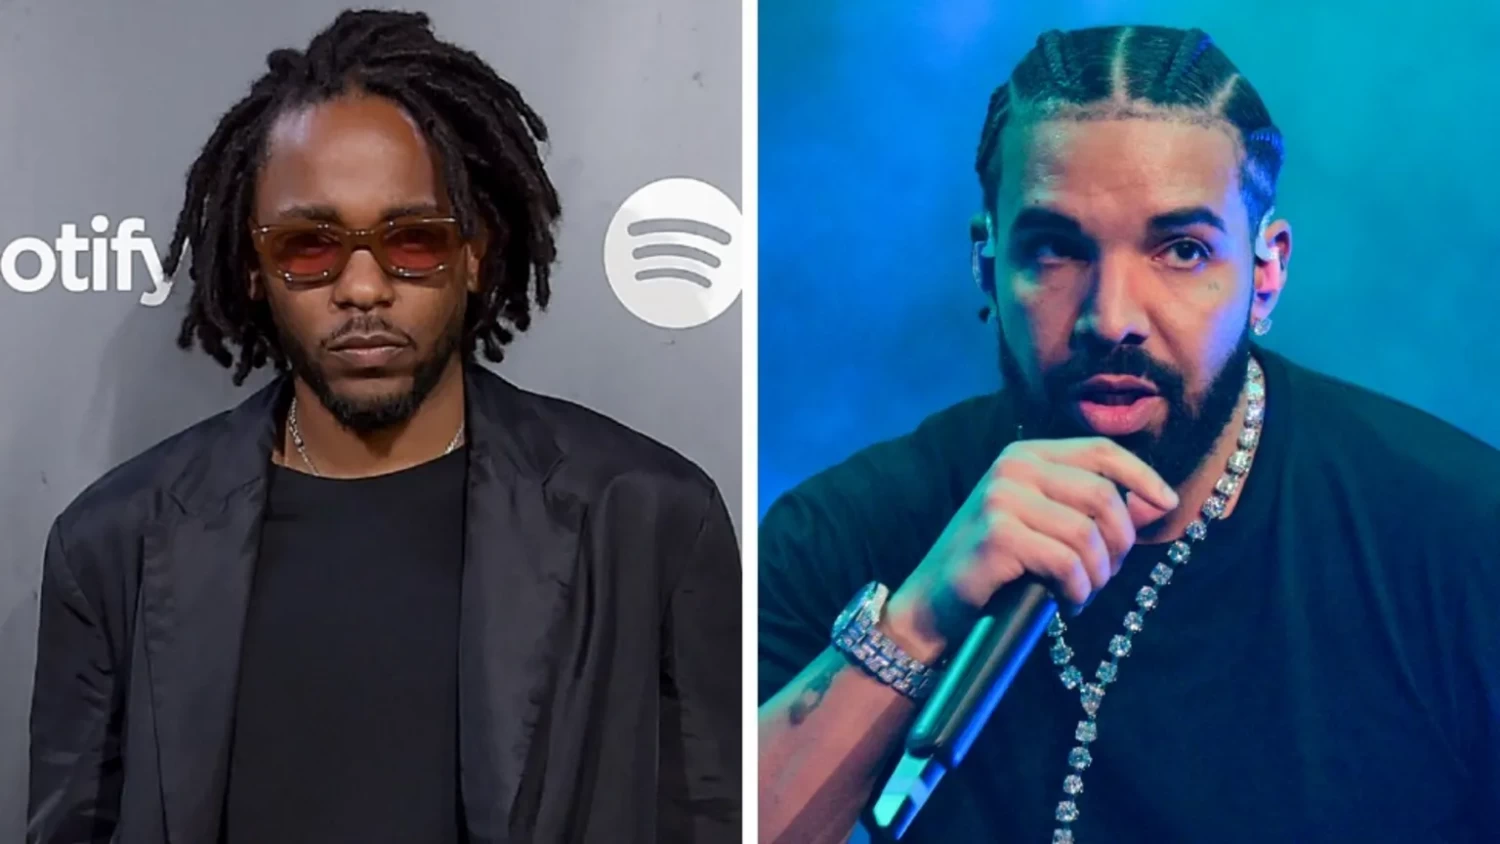 How Kendrick Lamar and Drake changed rap beefs forever Rapid-fire releases and fast pace of modern life elevate diss war to levels unparalleled in hip-hop history.